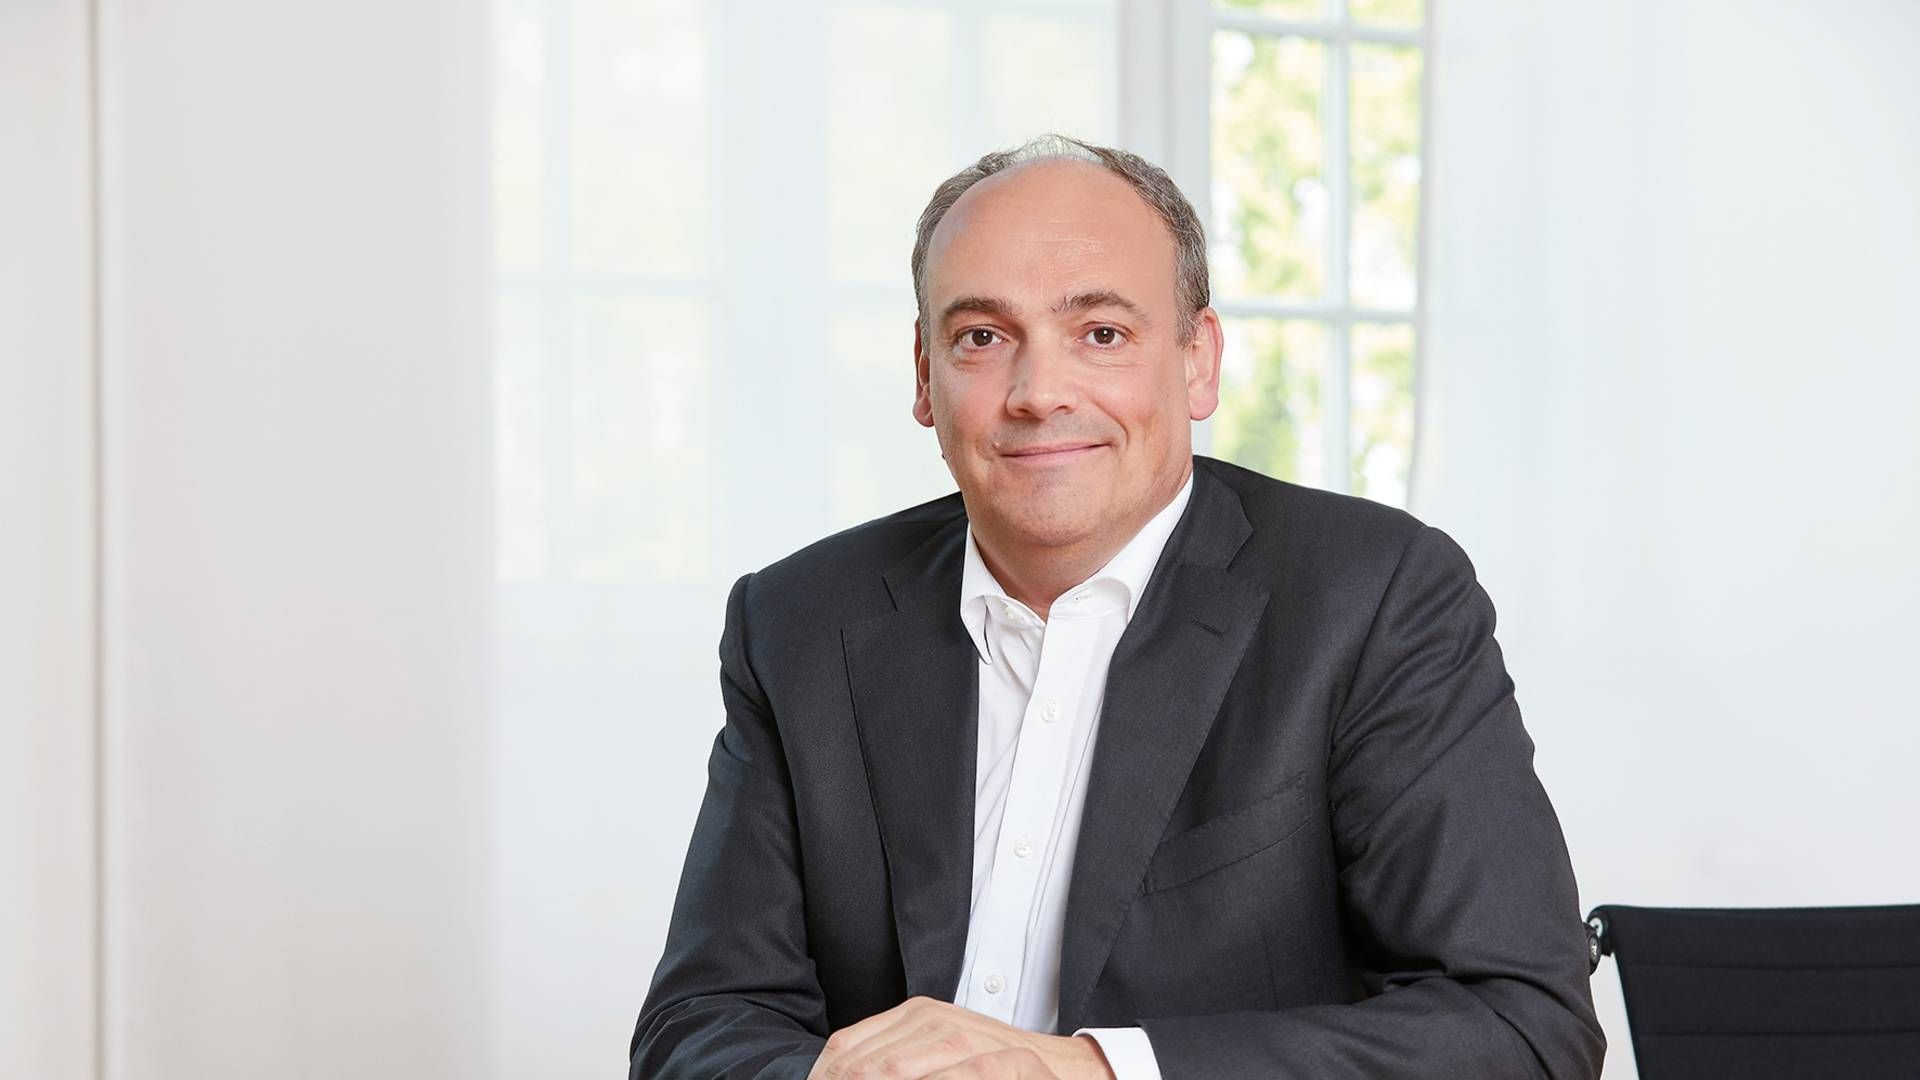 "Africa is an important strategic growth market for Hapag-Lloyd," says CEO Rolf Habben Jansen about the acquisition of NileDutch. | Photo: PR / Hapag-Lloyd